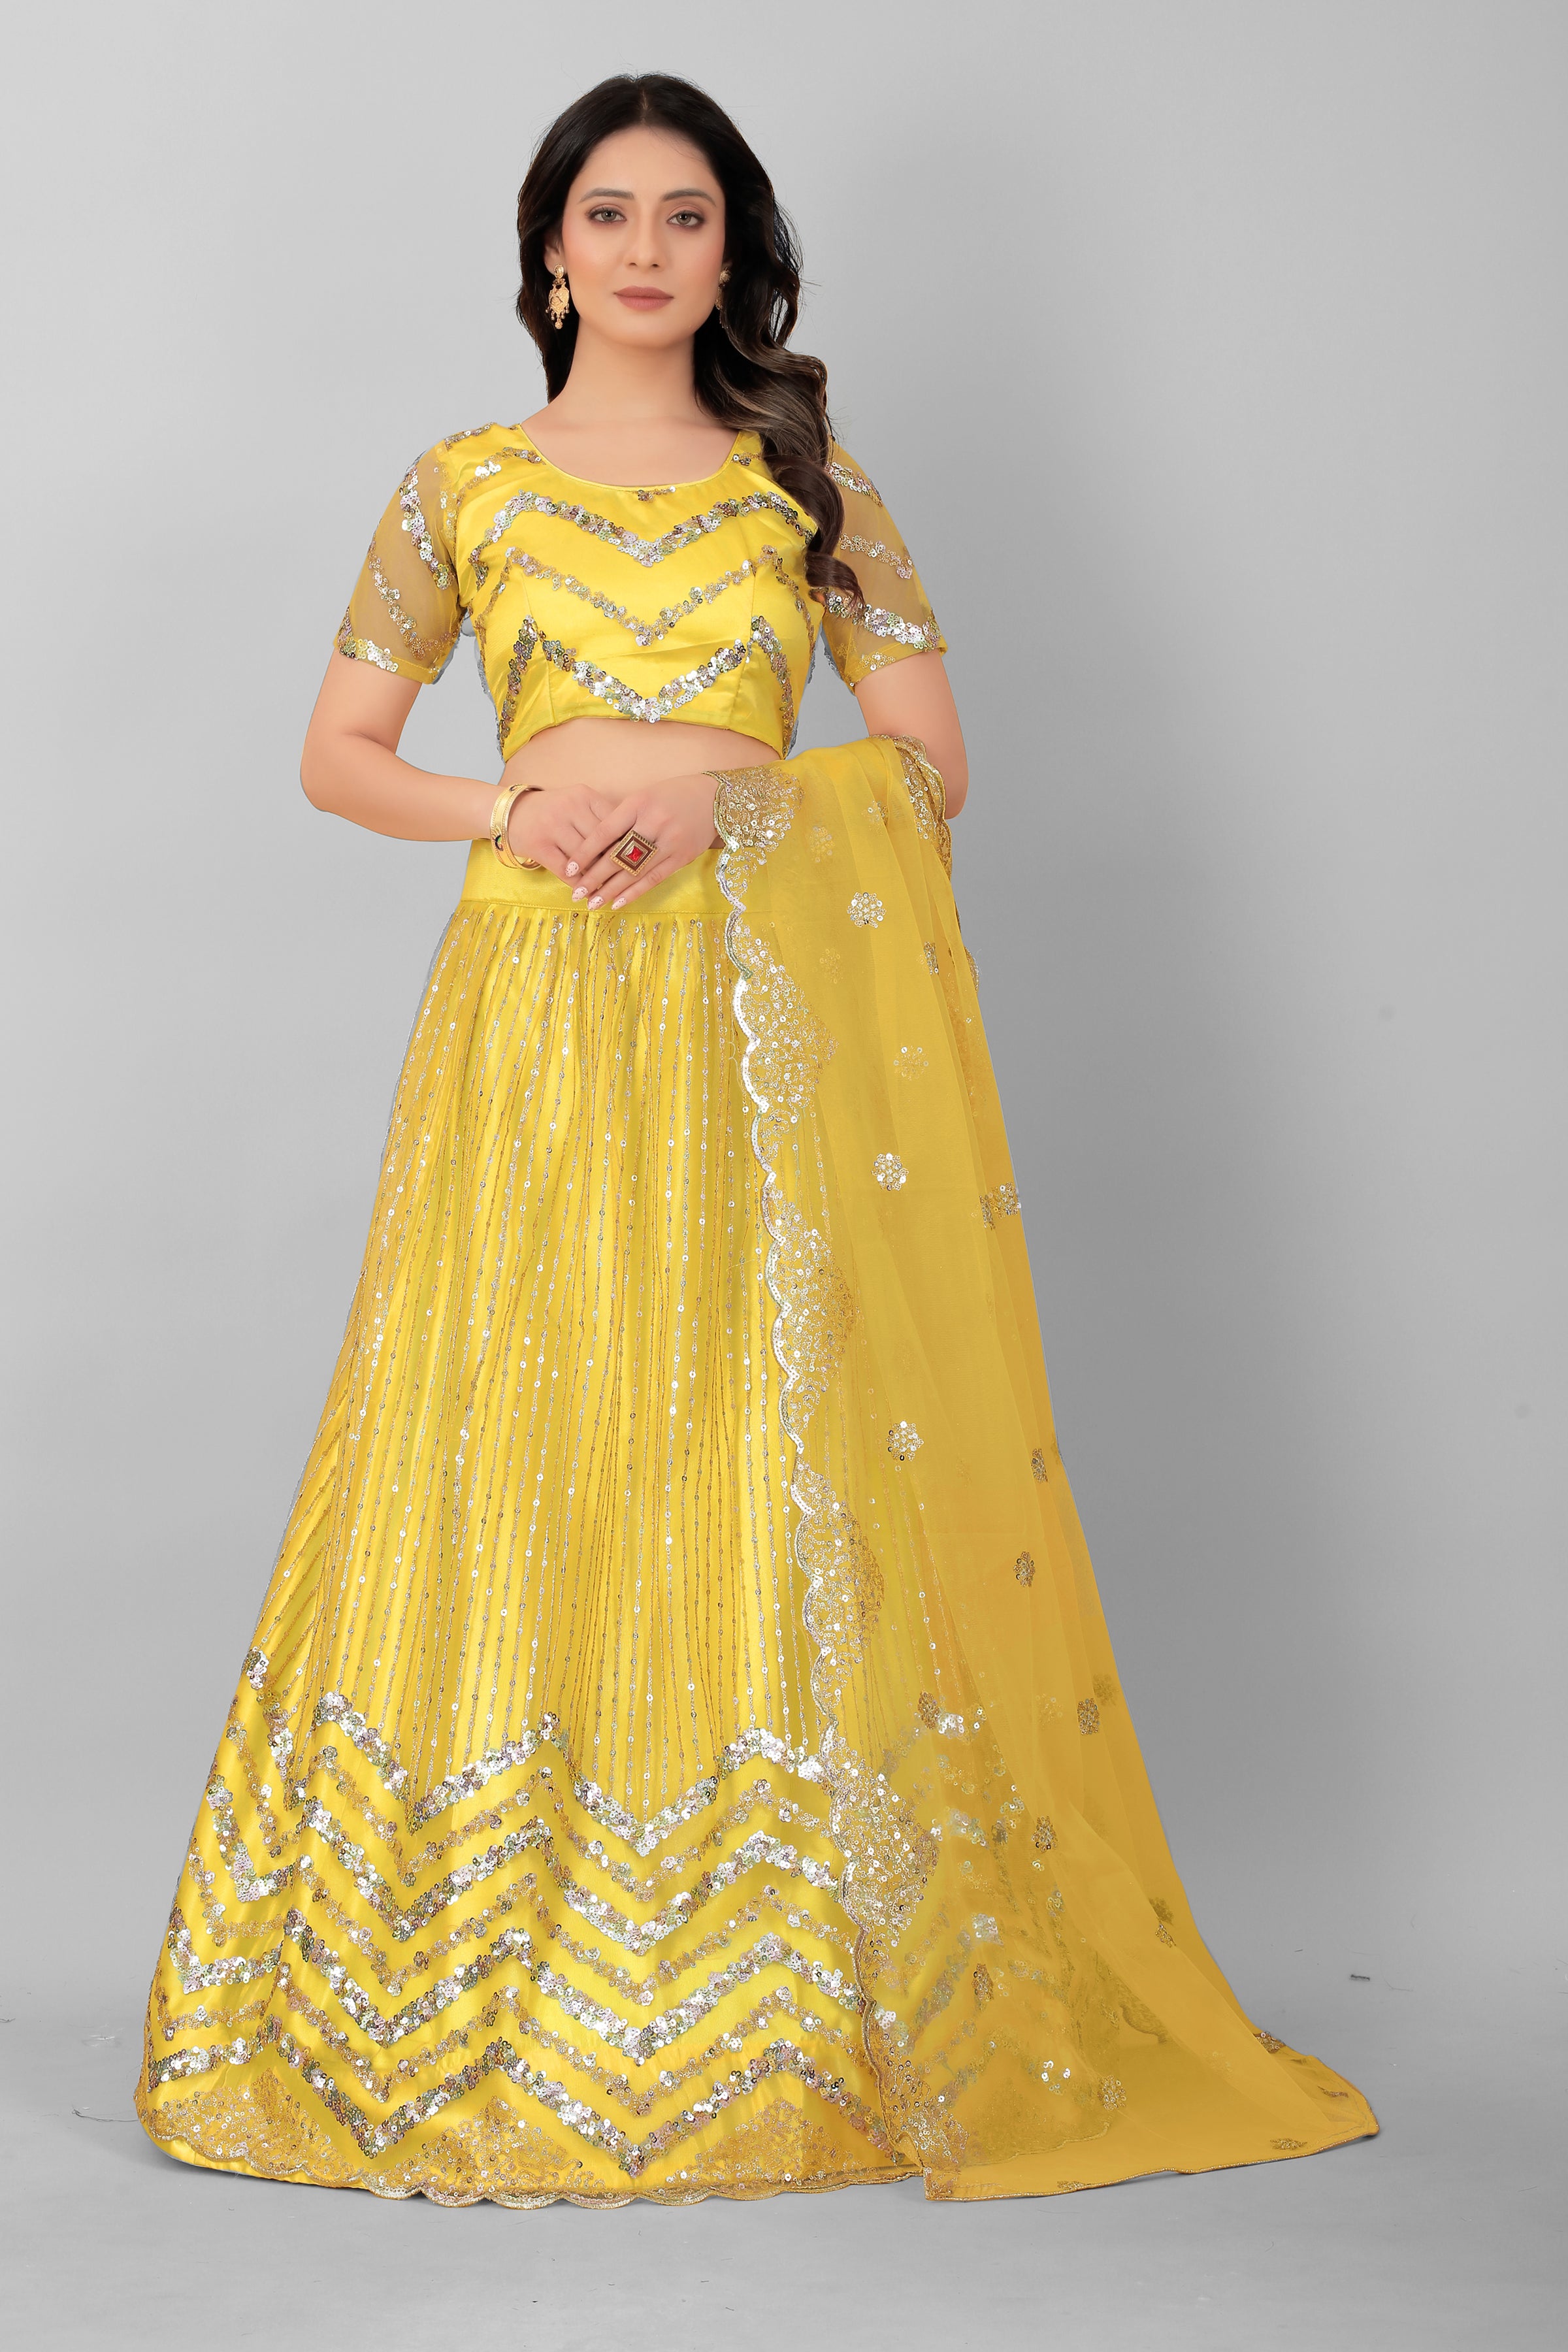 Women's New Fashion Sequine Embroidered work Designer Party Wear Lehenga Choli With Dupatta Semi Stitched. - Embro Vision